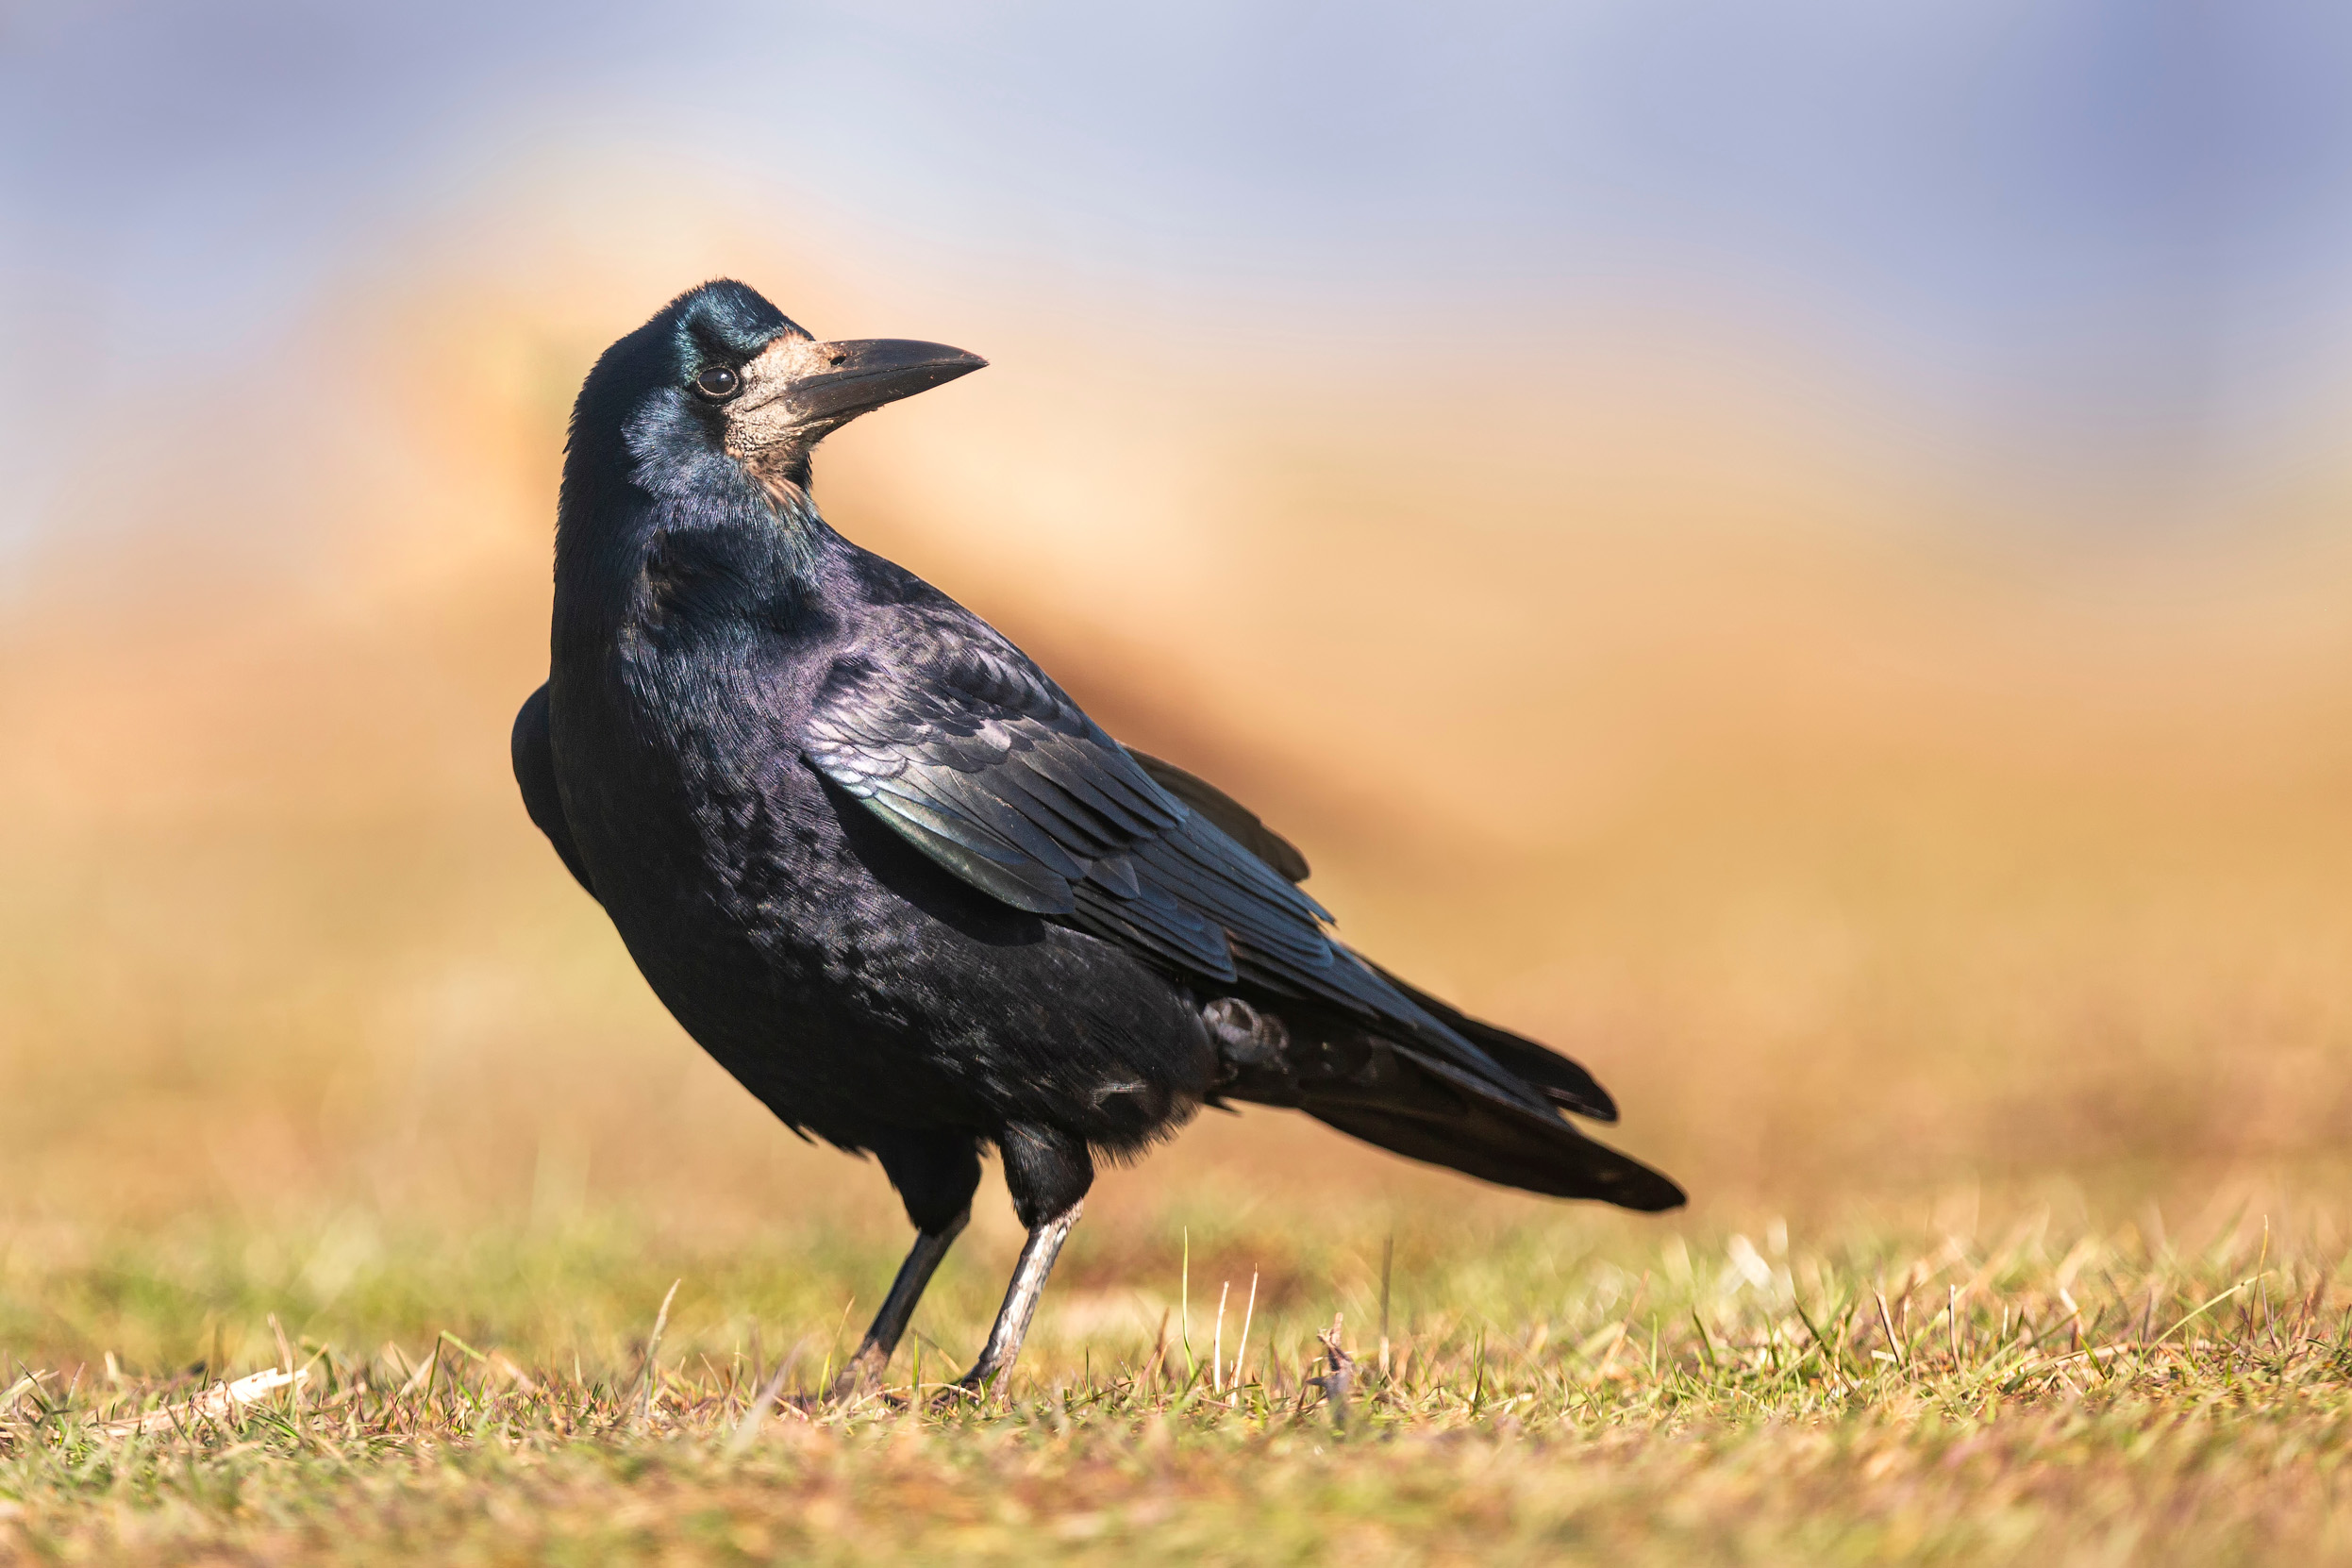 A lone Rook stood on dried grass looking over their shoulder.